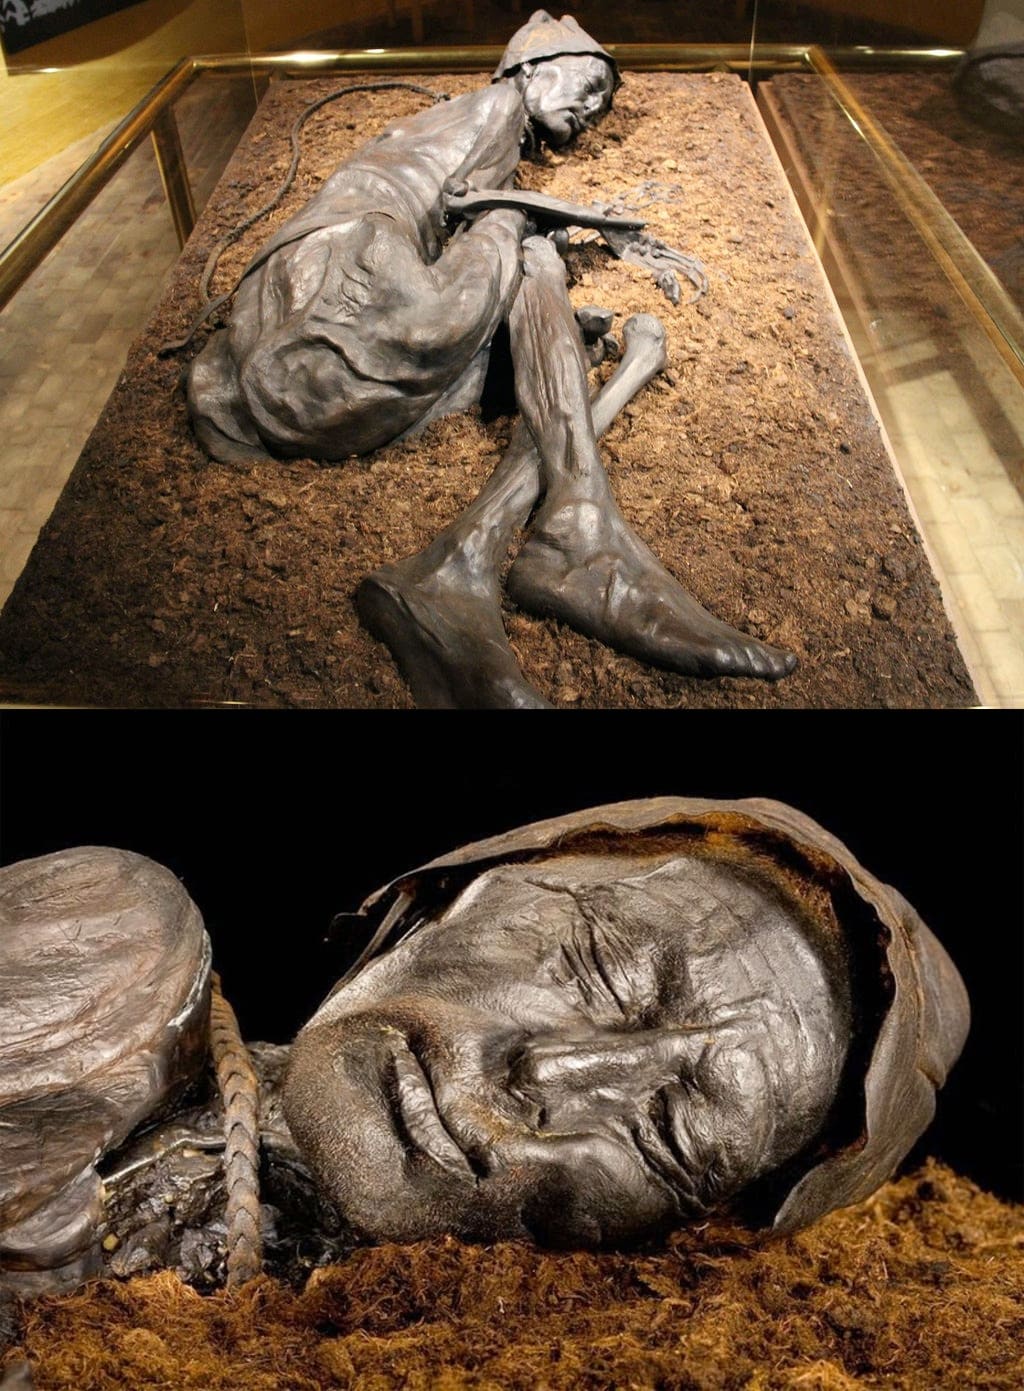 The "Tollund man" is a 2400-year-old bog body and victim of human sacrifice from the Iron Age, found in Bjældskovdal in Denmark. His body was so well-preserved that even after 2400 years scientists were still able to take his fingerprints and determine what he had eaten last